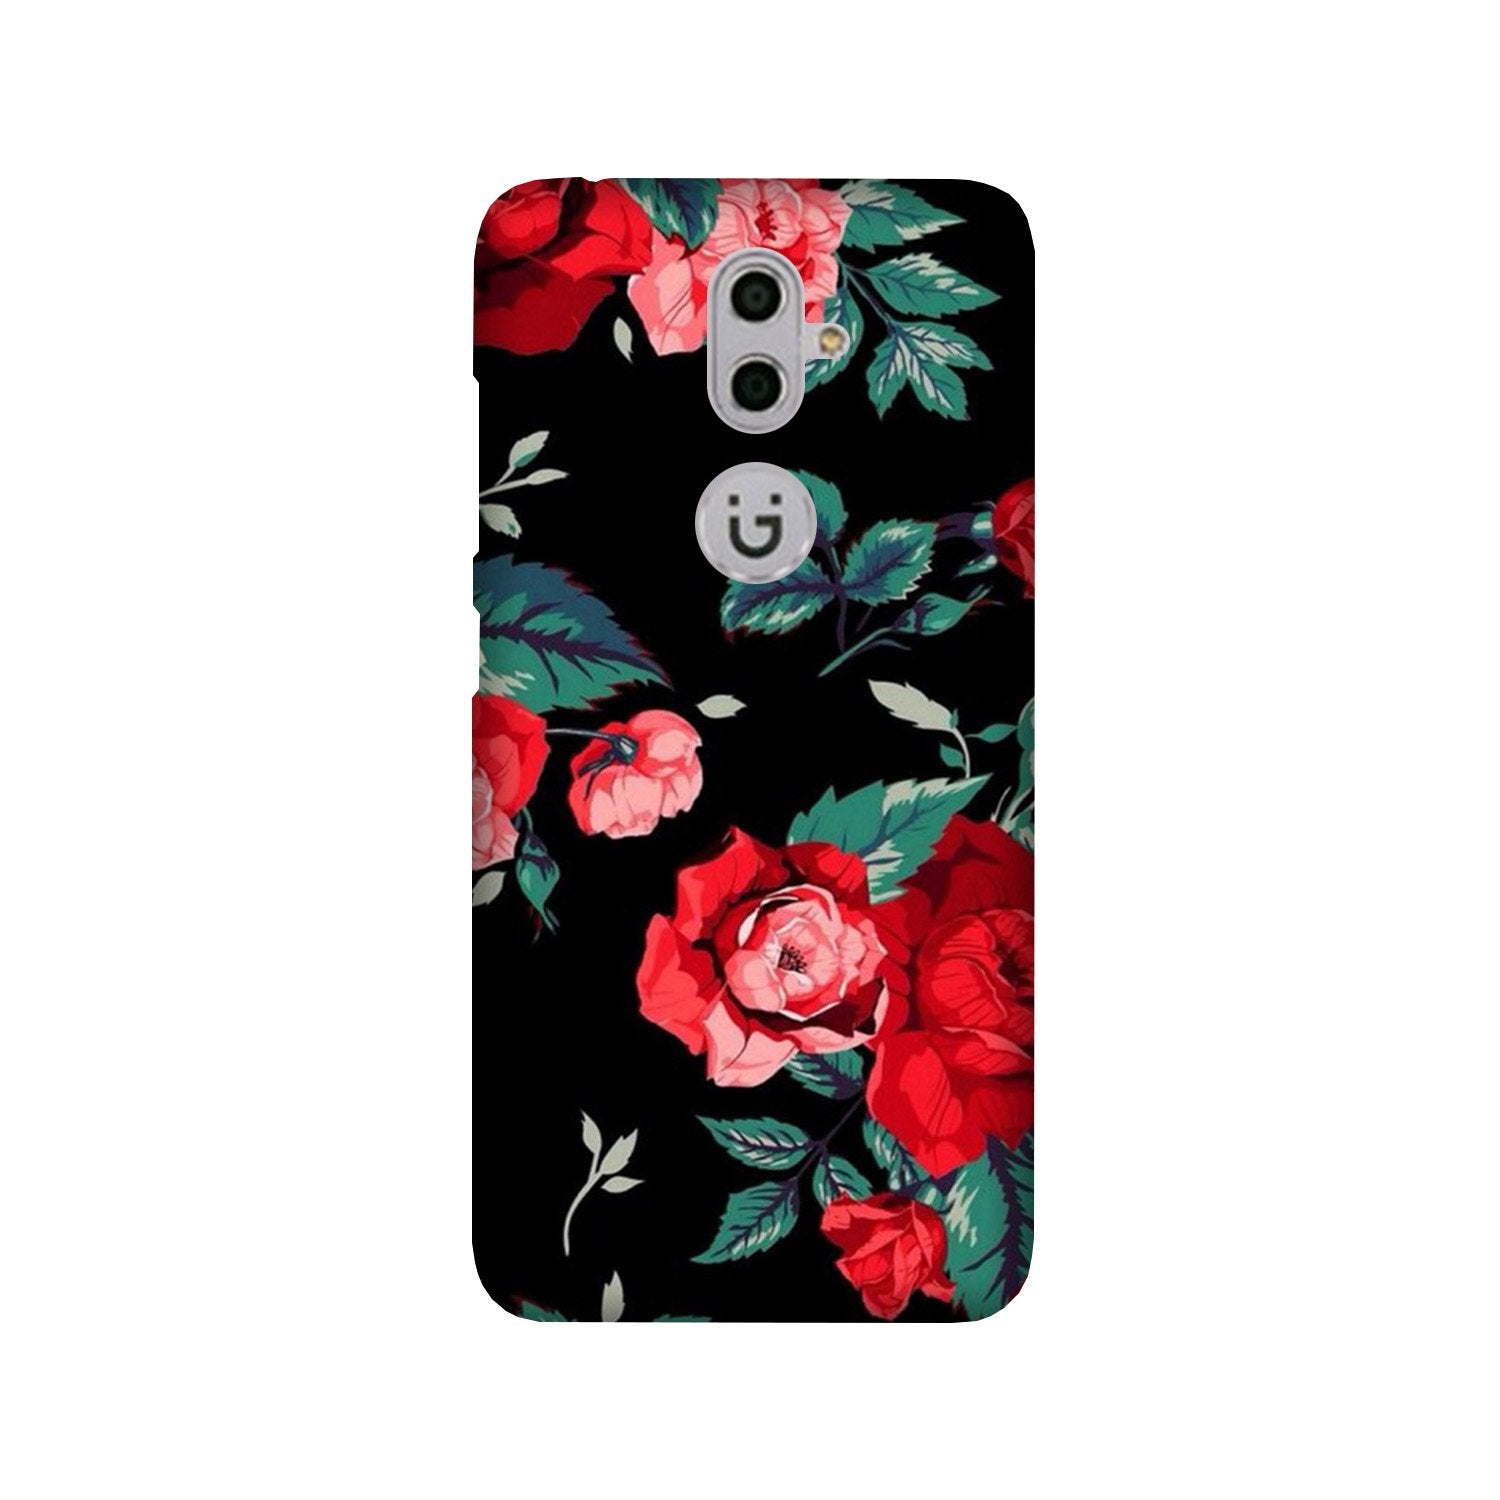 Red Rose2 Case for Gionee S9